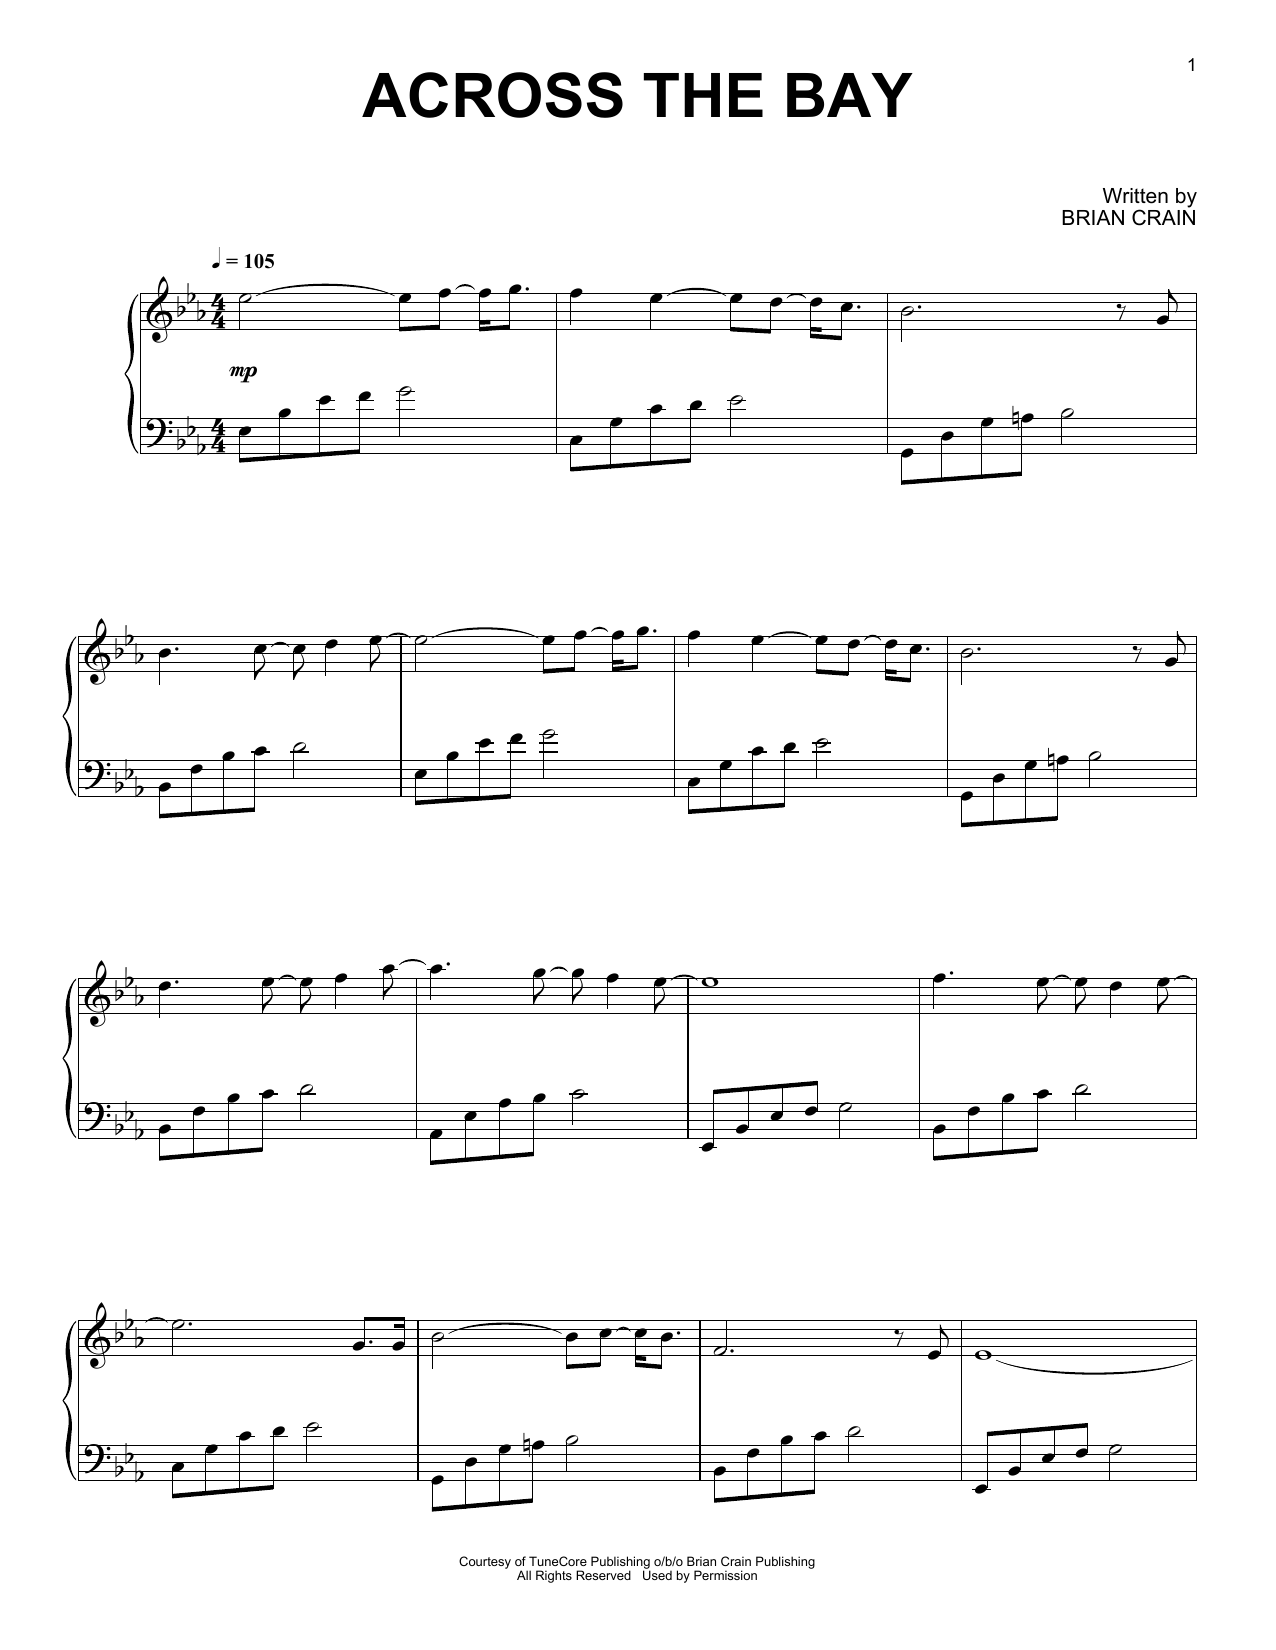 Brian Crain Across The Bay sheet music notes and chords. Download Printable PDF.